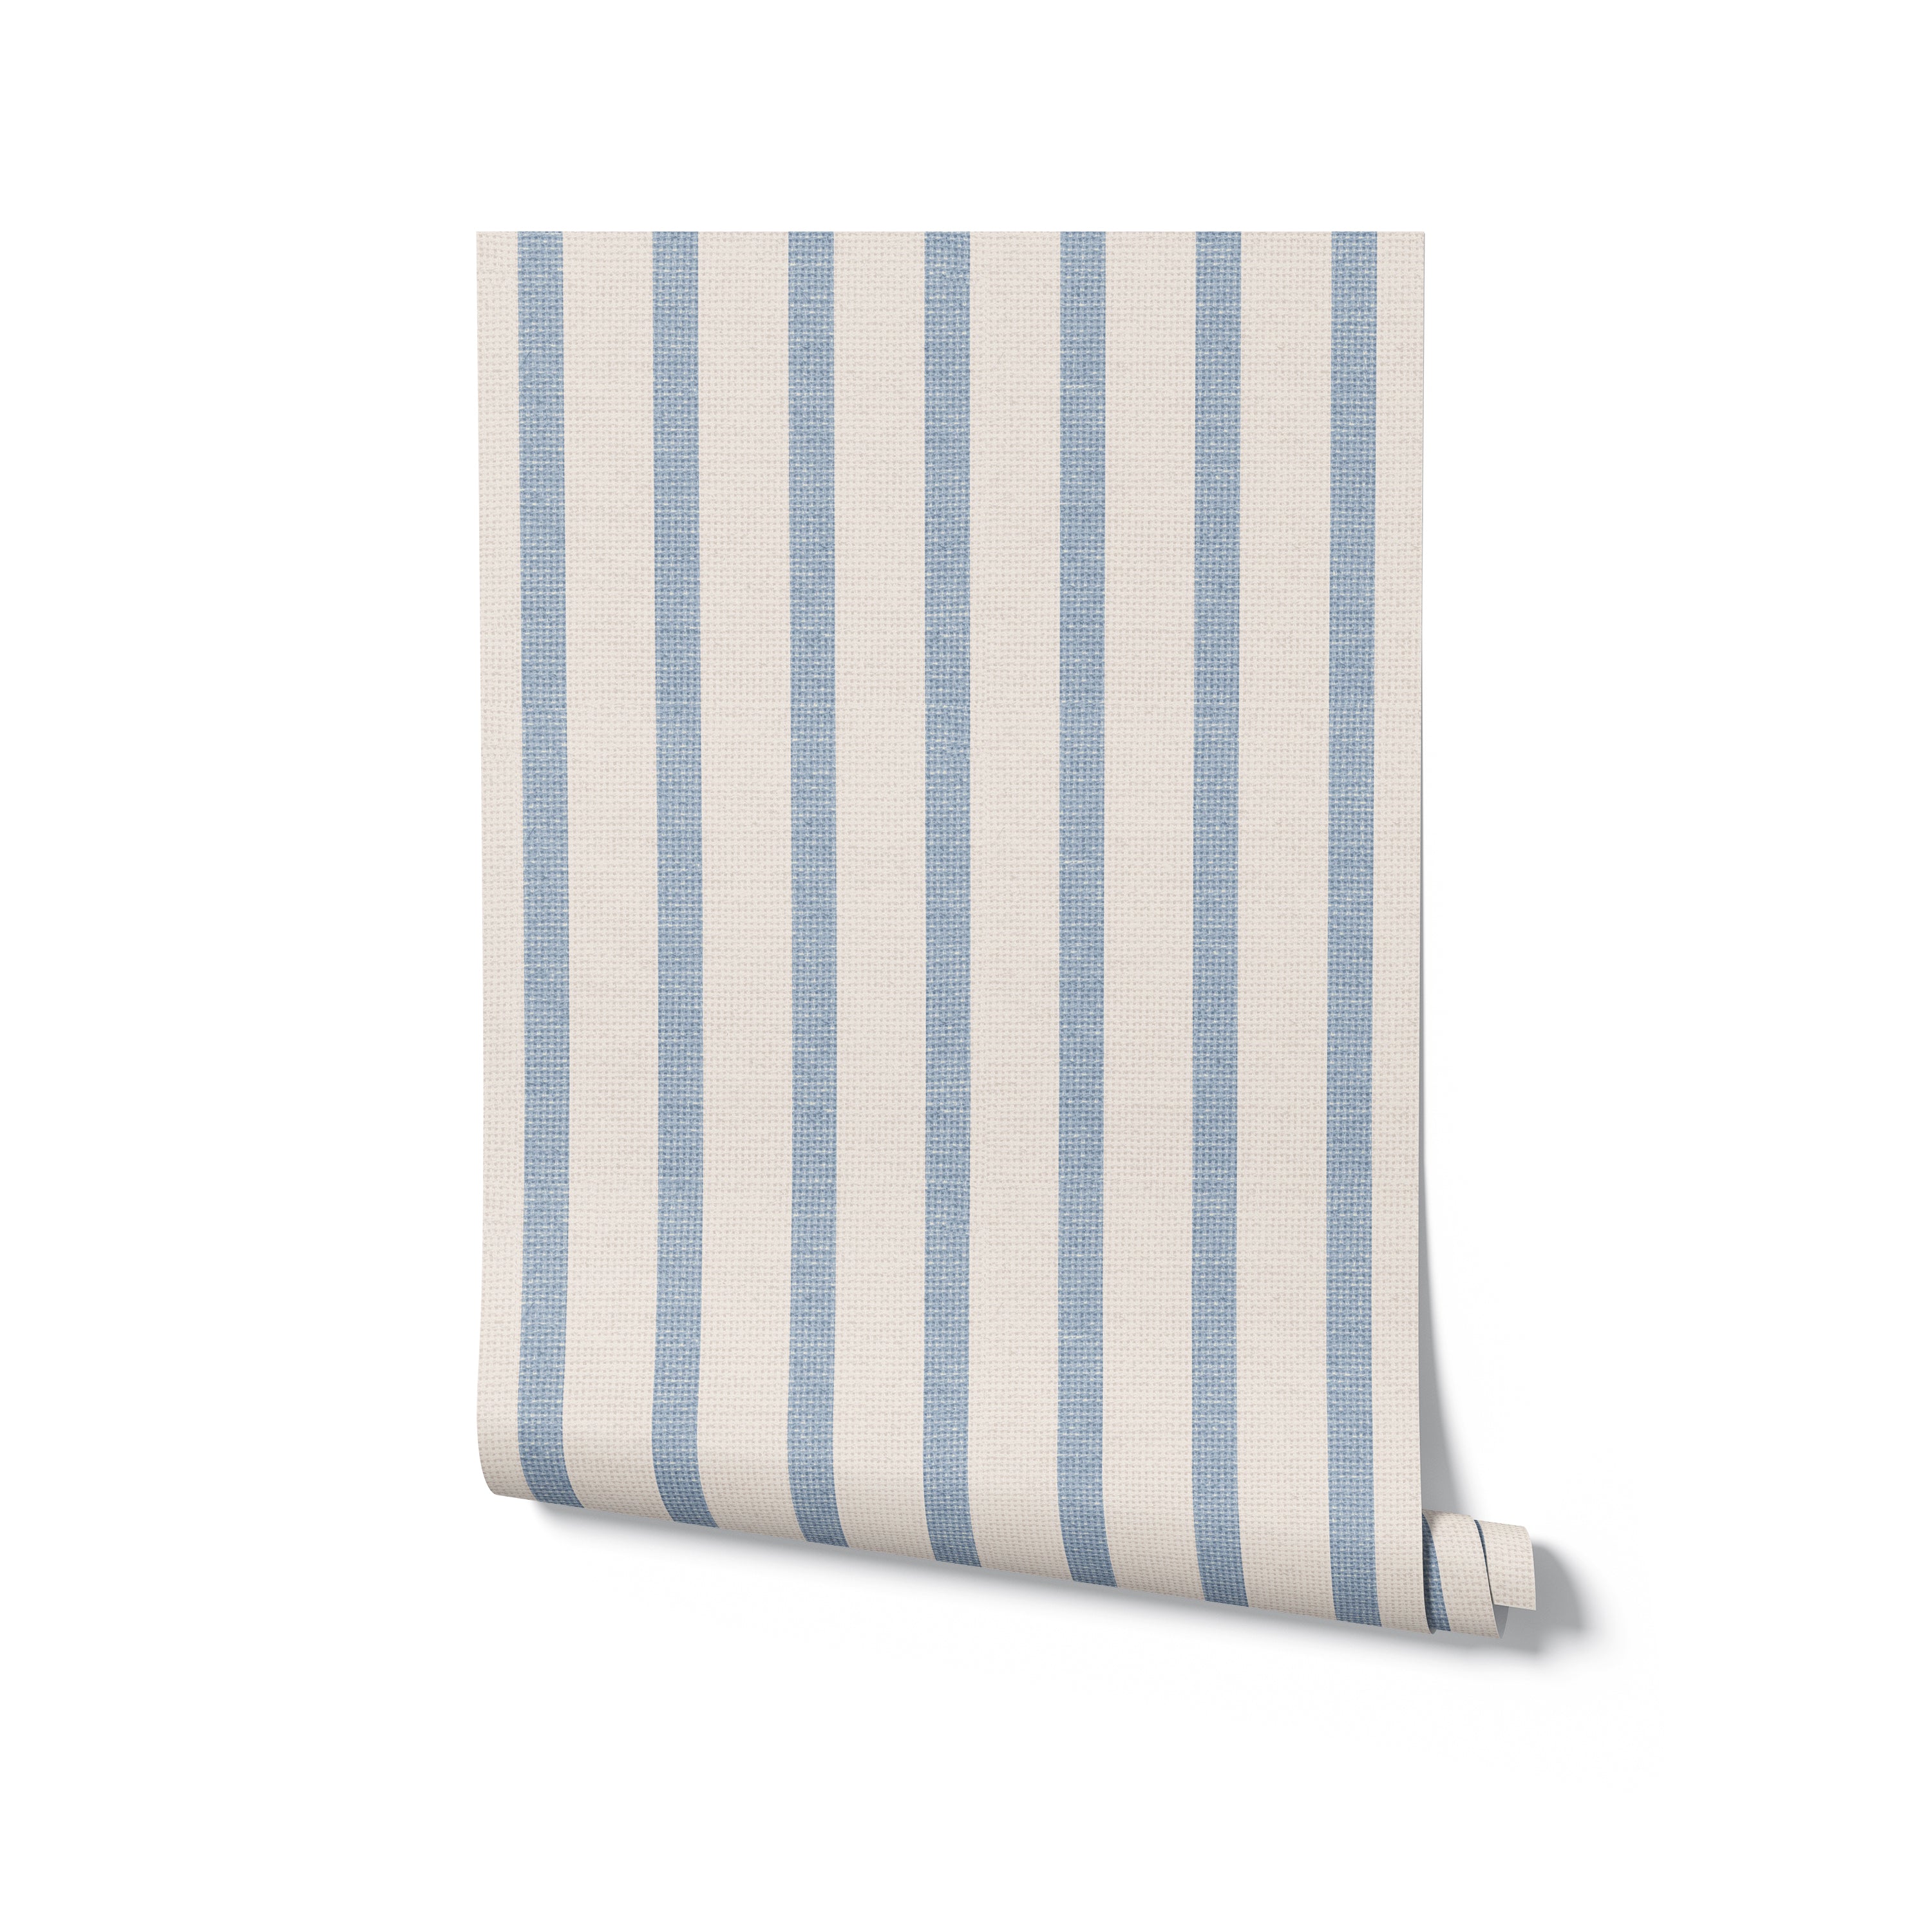 A roll of Fabric 10B Wallpaper featuring vertical stripes in beige and soft blue. This high-quality wallpaper is perfect for home decor, offering a clean and serene backdrop for various room styles